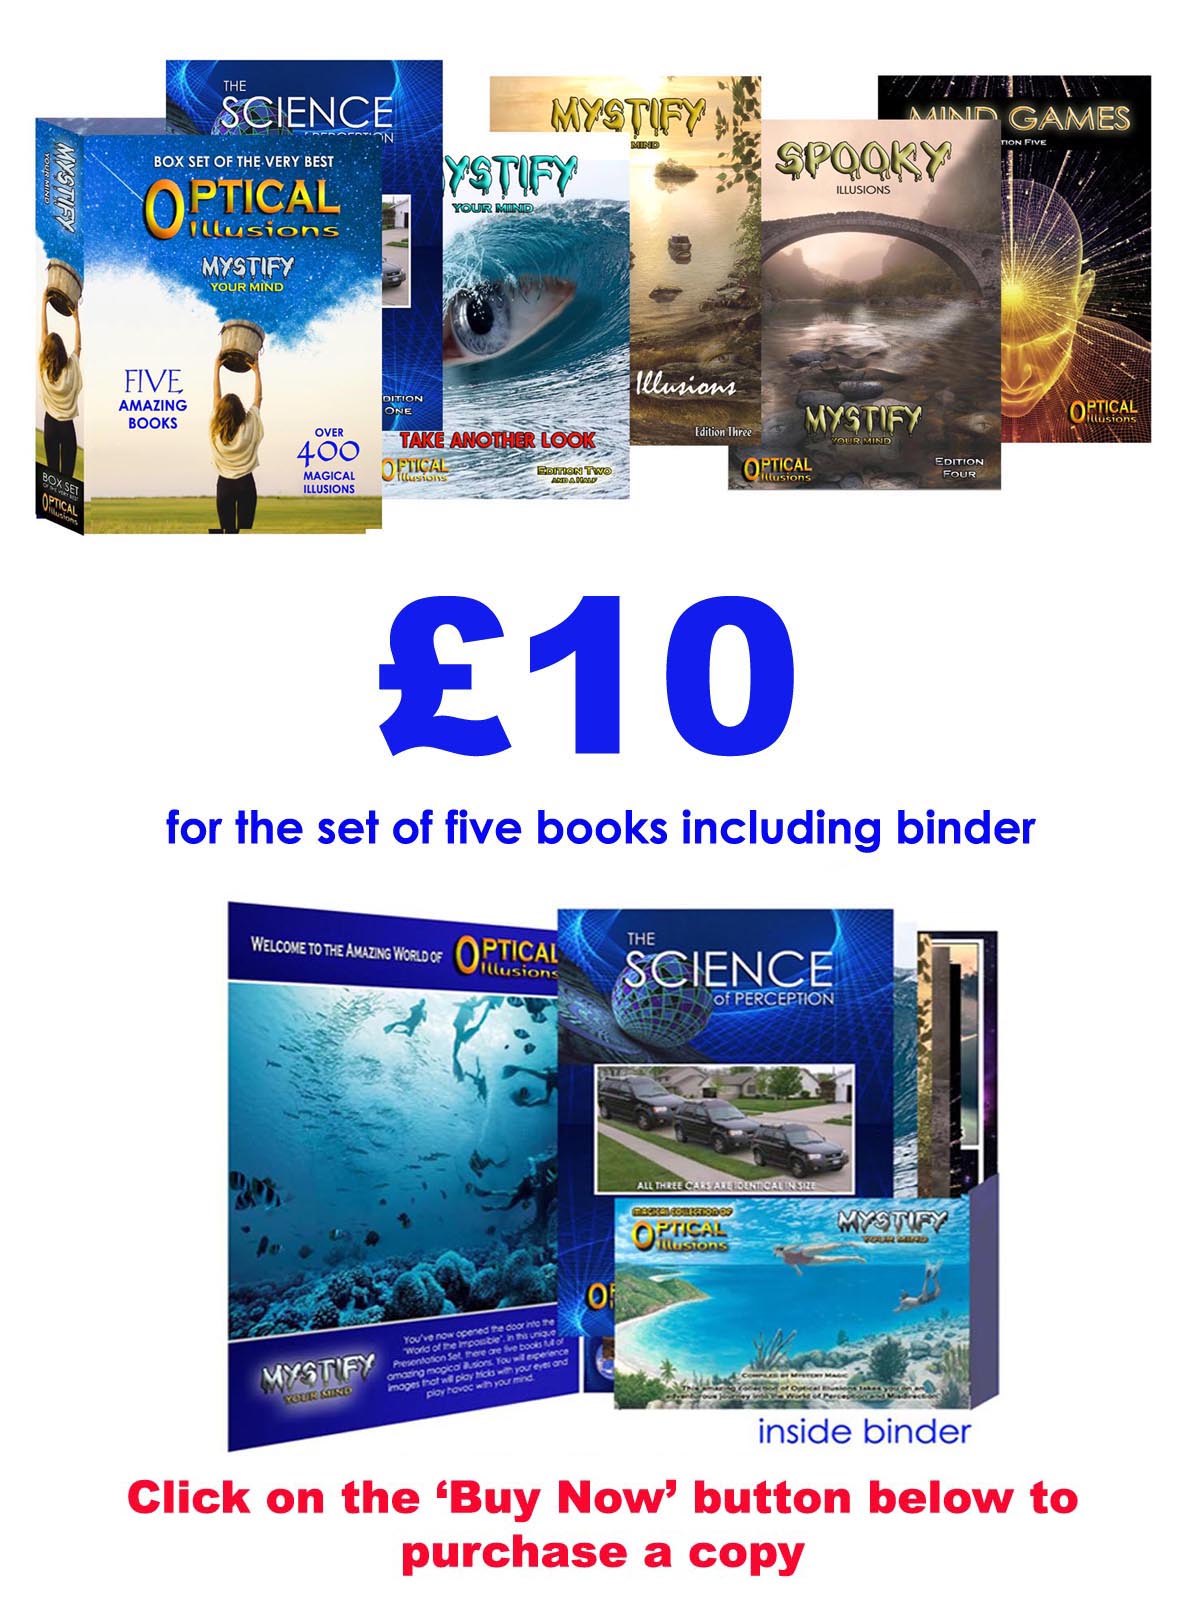 the cost of the books are £10